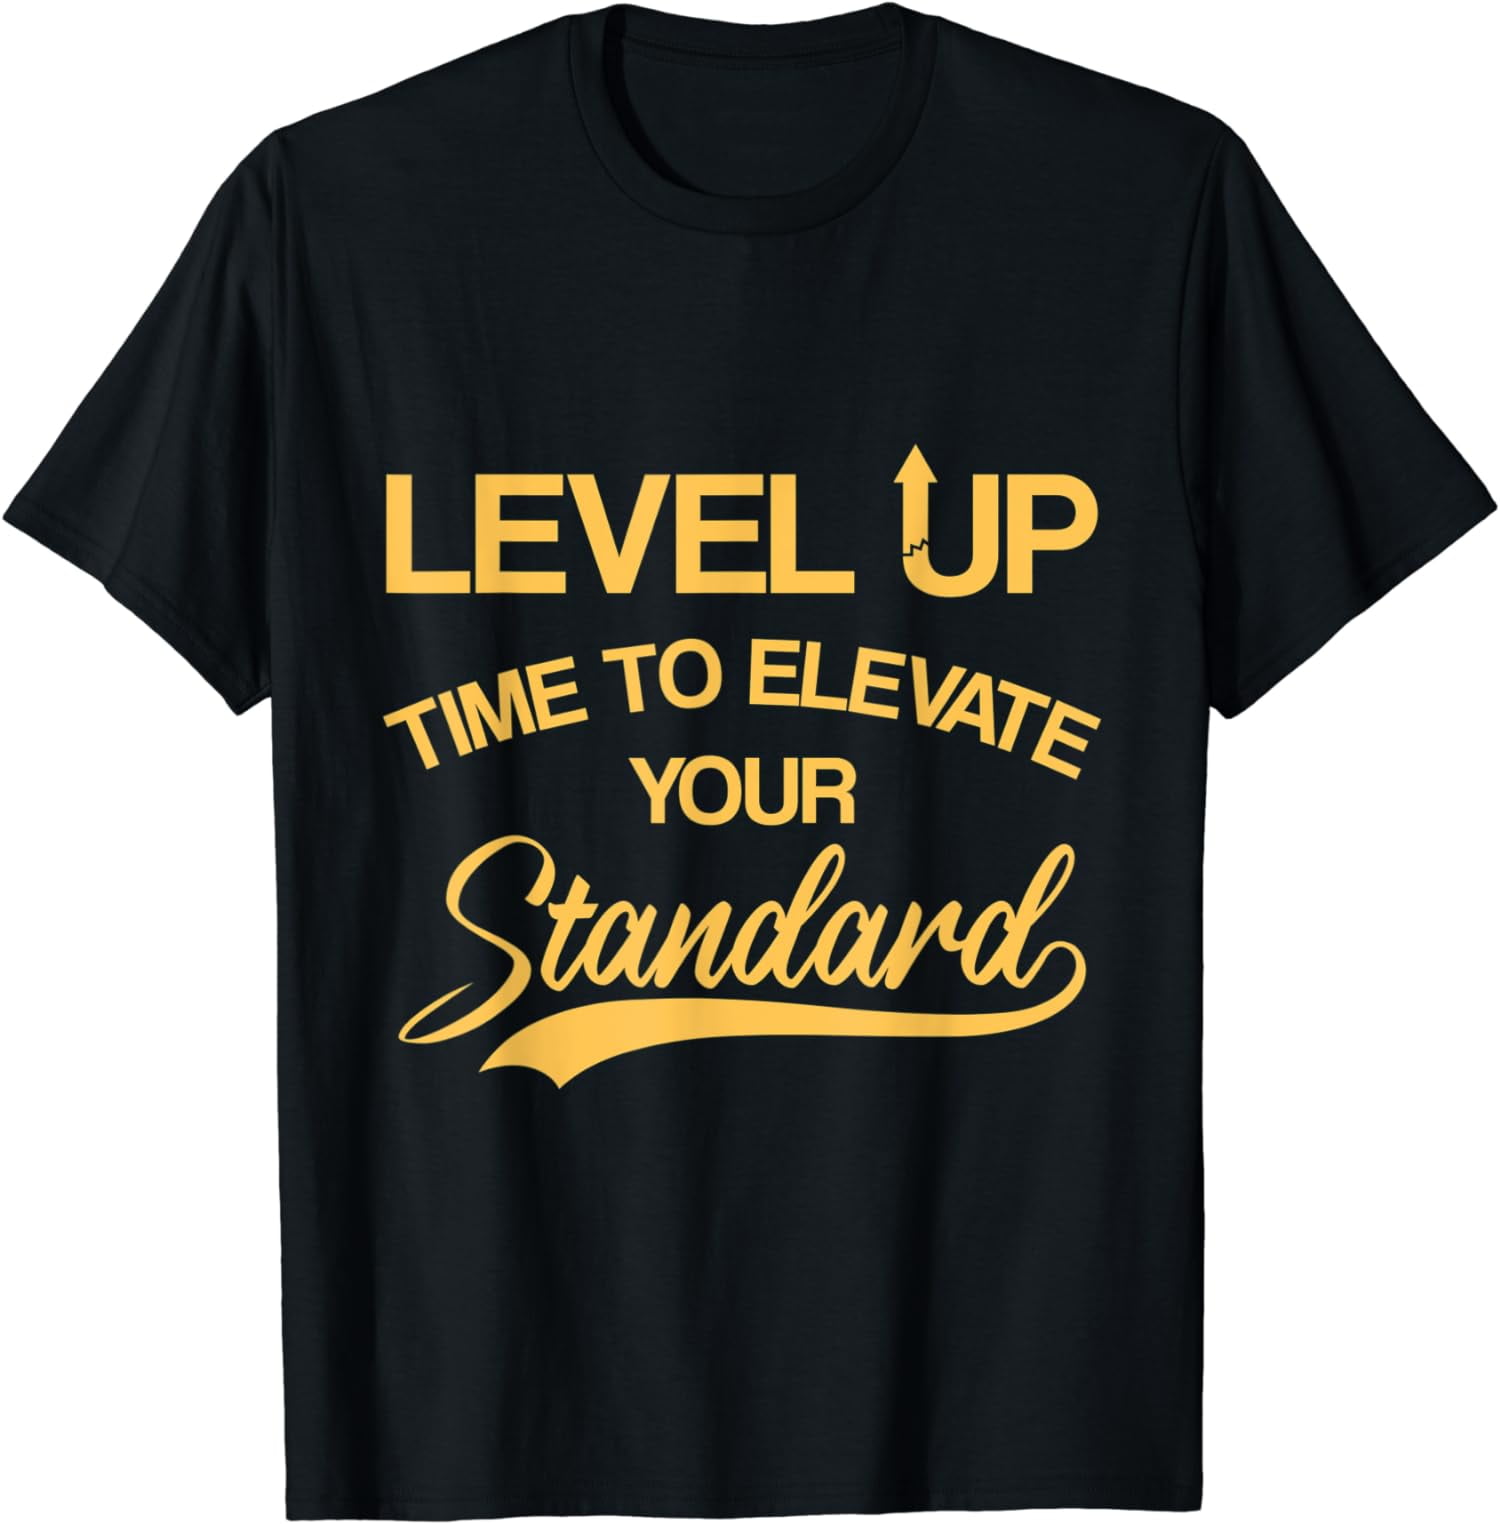 Level Up Time to Elevate Your Standard T-Shirt - Walmart.com